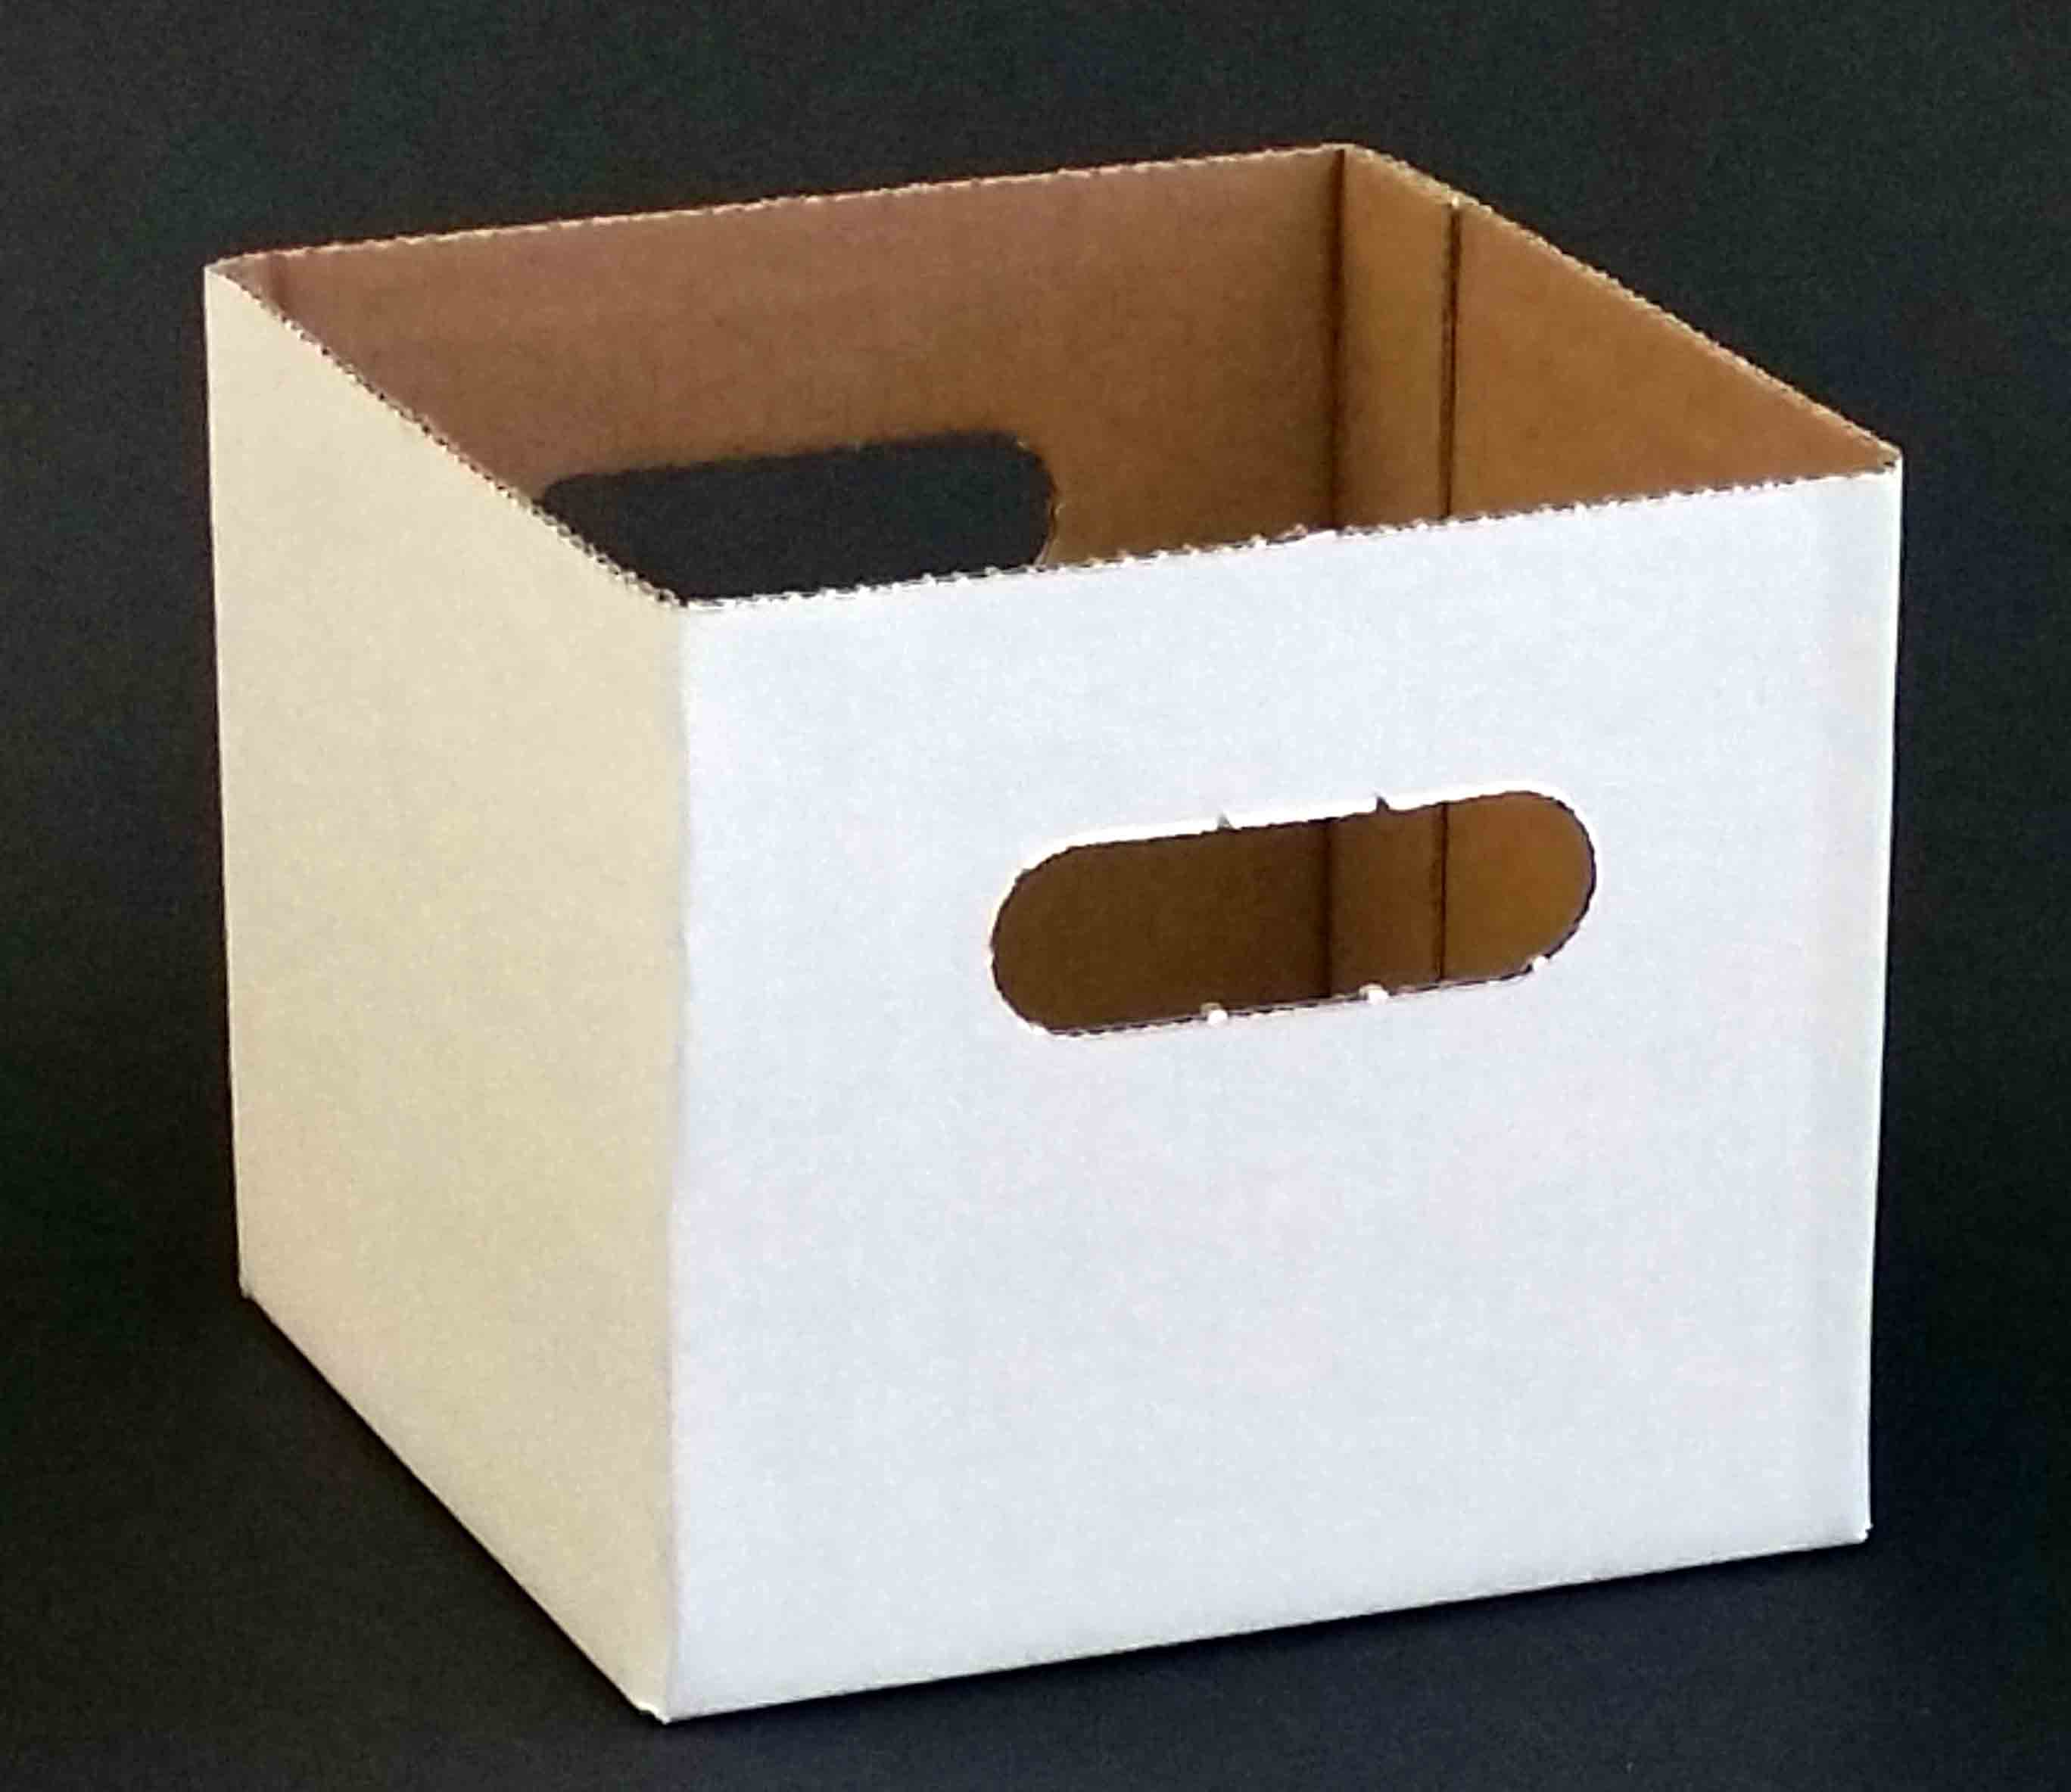 776 - 7 x 7 x 6" Delivery Box - 40.10 bdle